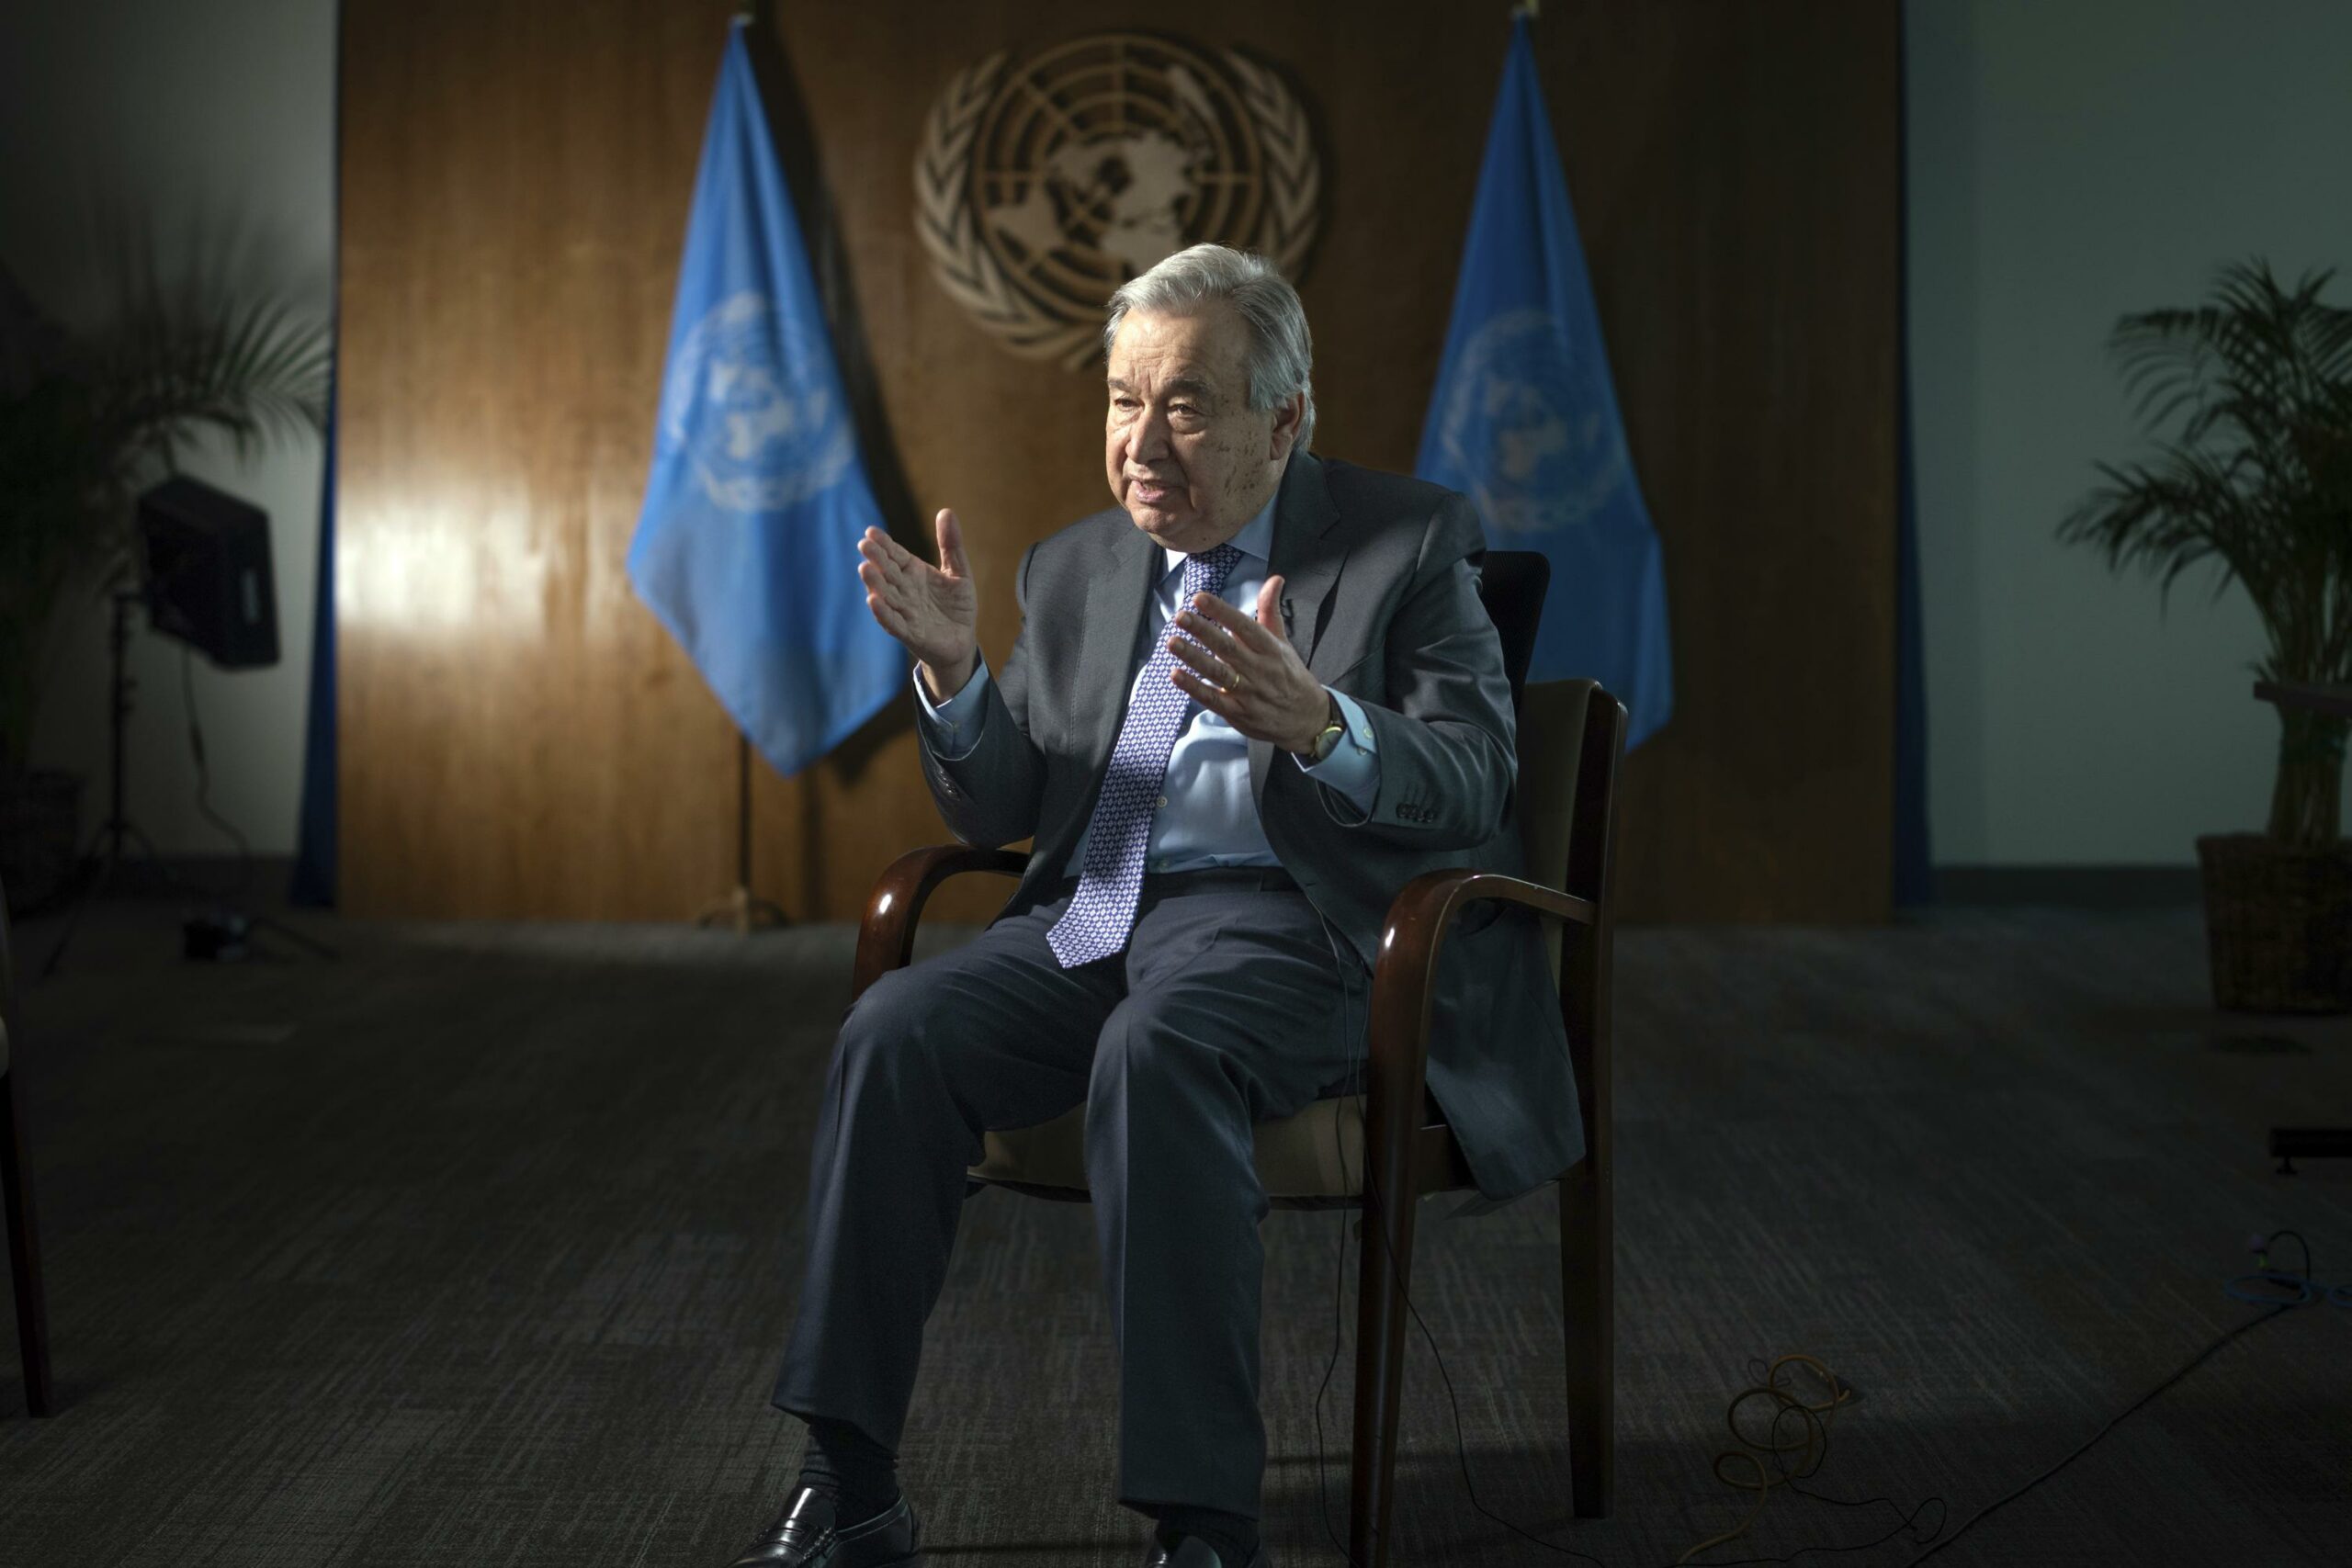 World worse now due to Covid, climate, conflict, says UN chief